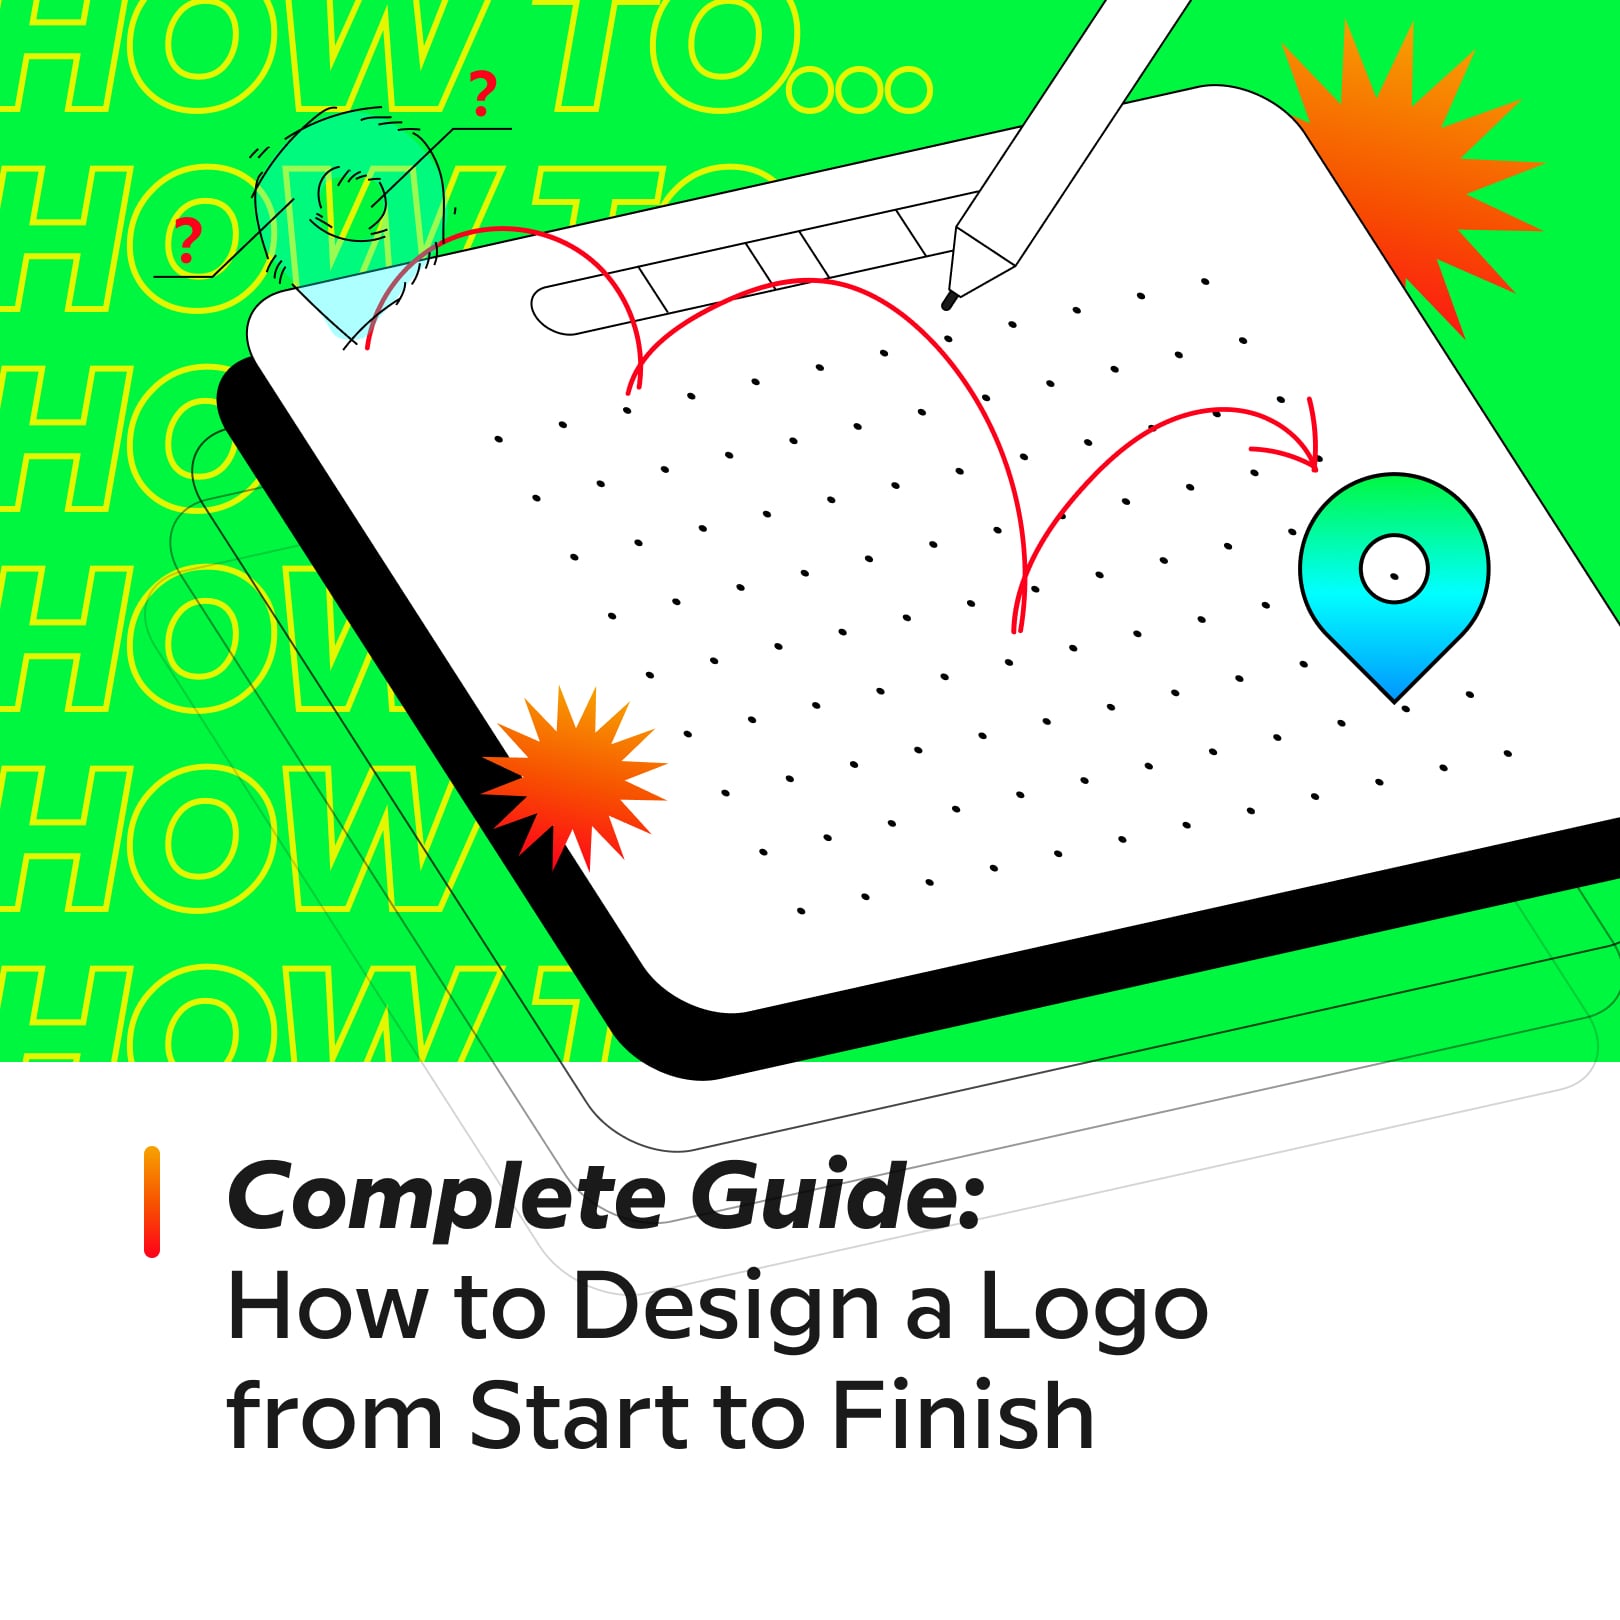 Complete Guide: How to Design a Logo from Start to Finish